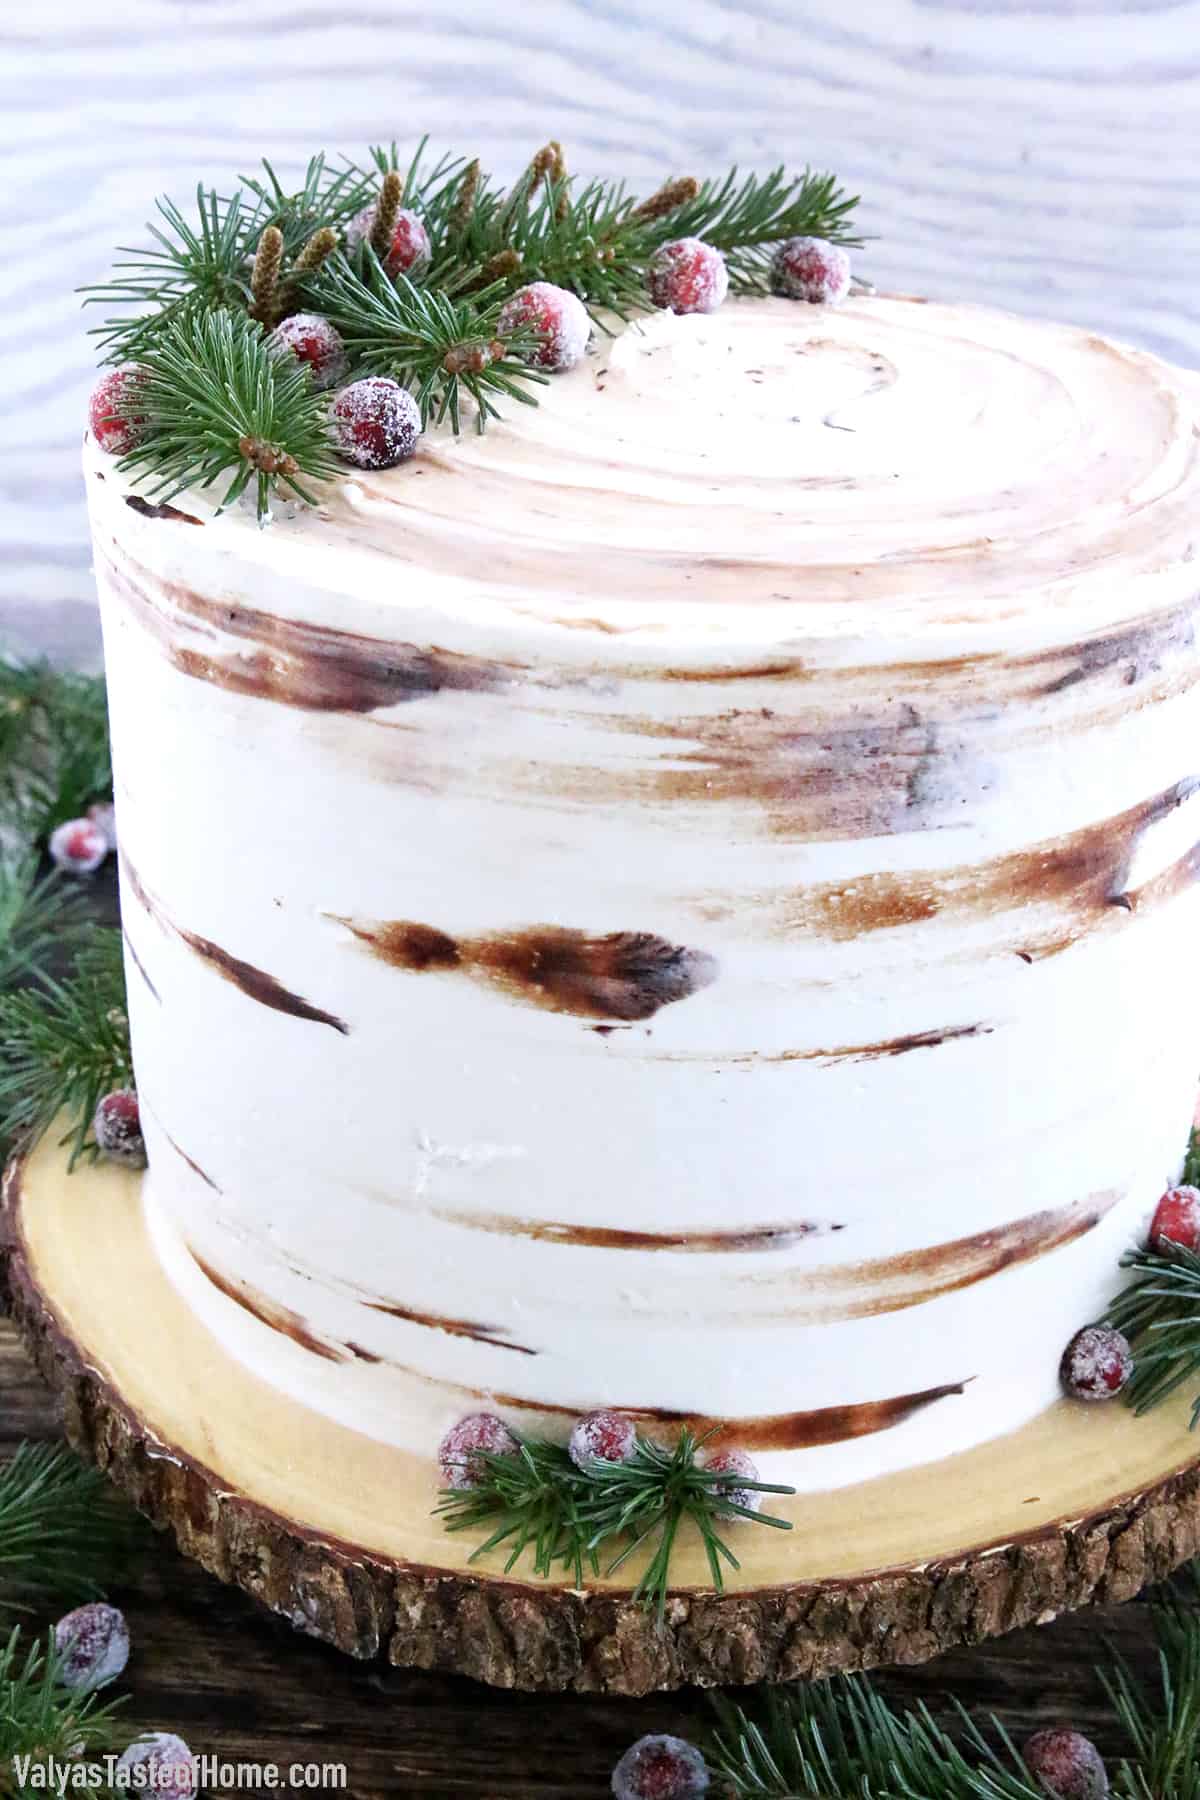 Another stump cake! White Birch Tree Stump Cake this time. They are so much fun to make.